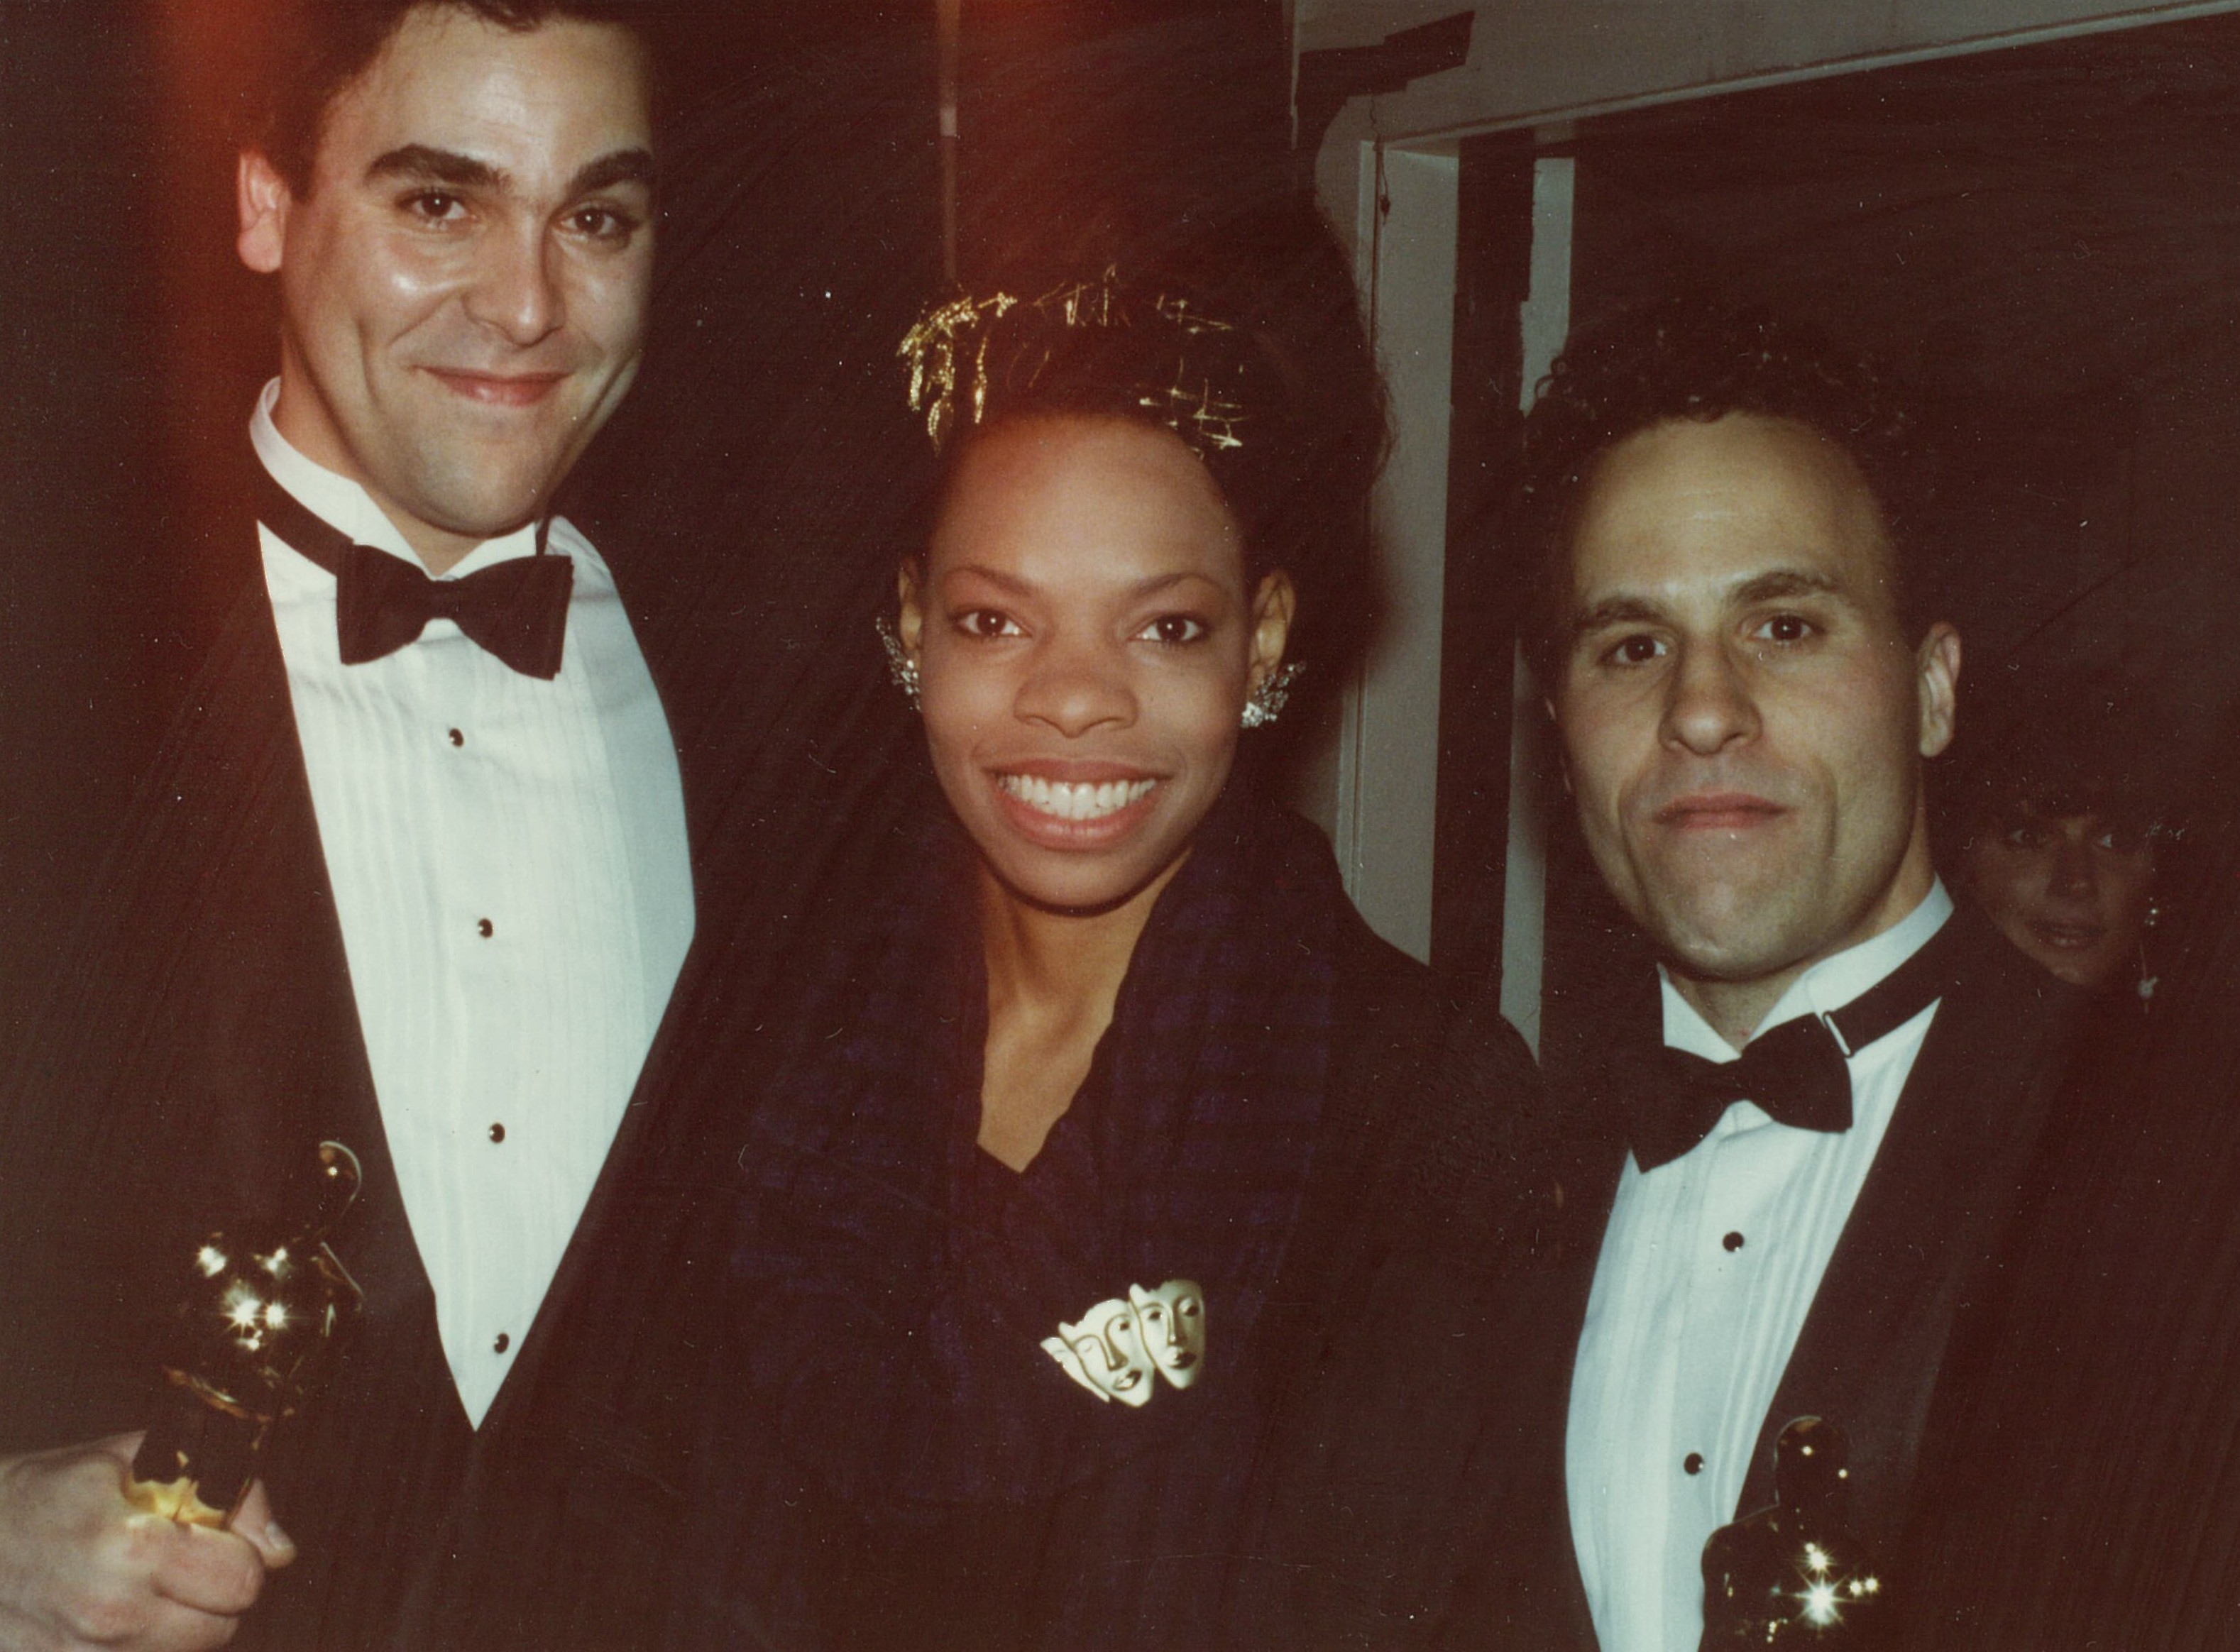 John Caglione, Cat'Ania McCoy-Howze and Doug Drexler at the 1990 Academy Awards. John and Doug won Best Makeup for the feature film Dick Tracy.